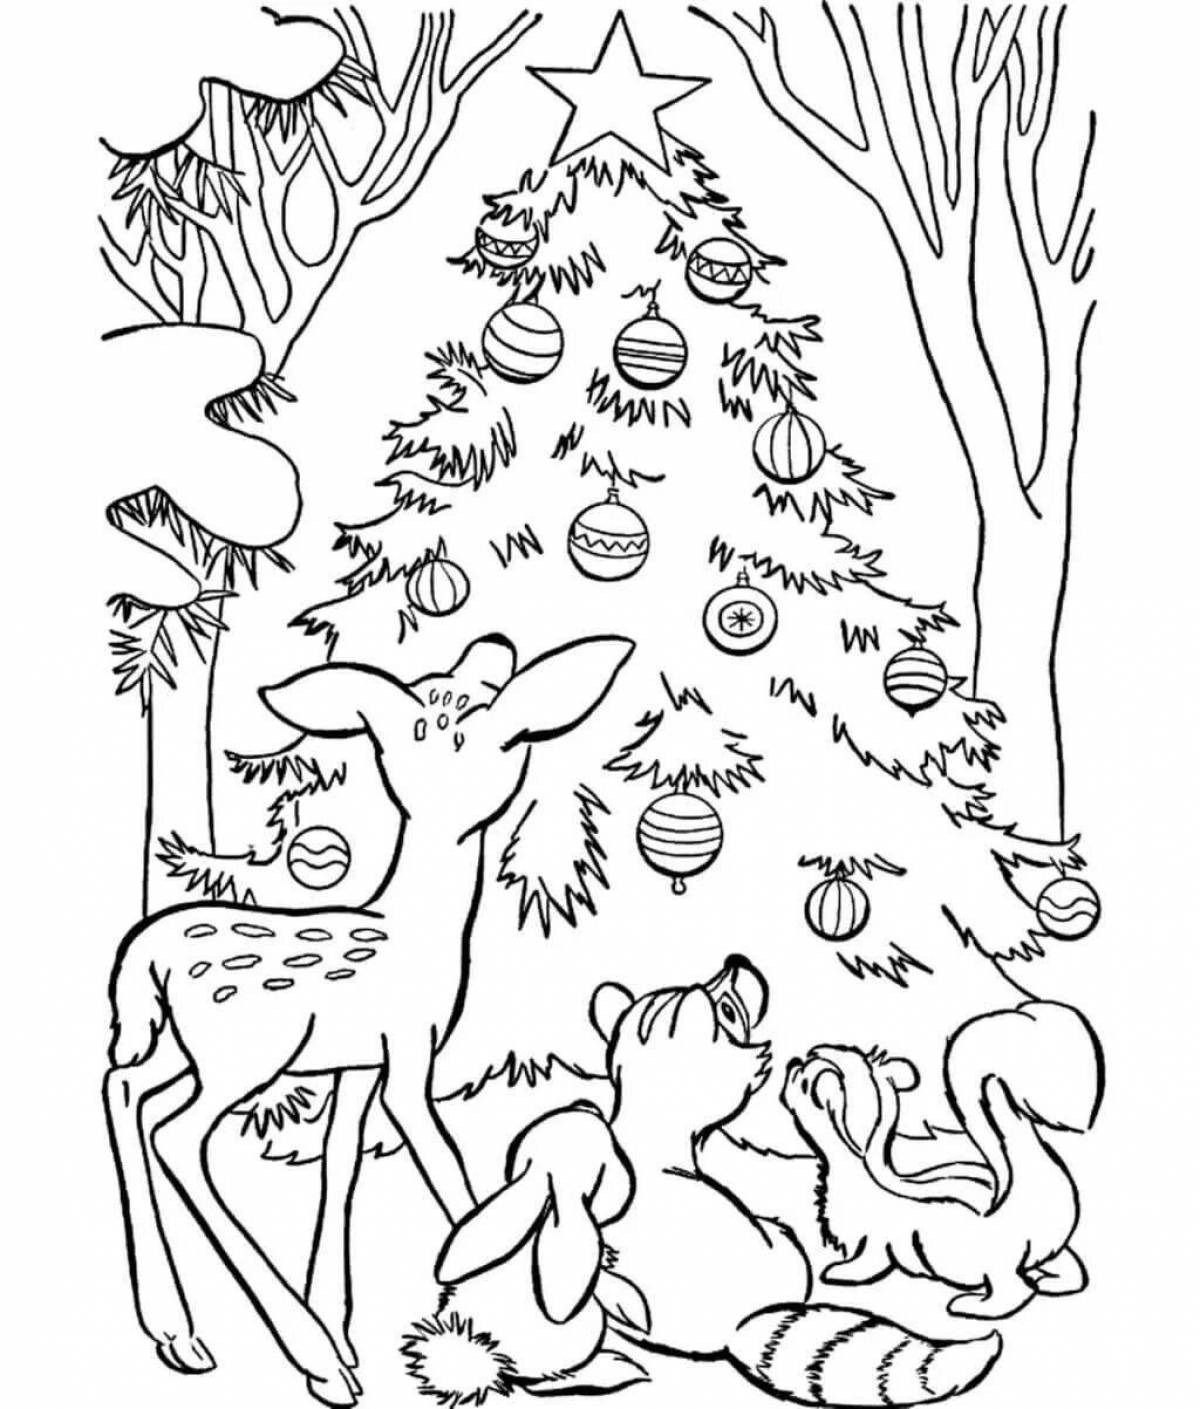 Violent winter forest coloring book for children 6-7 years old